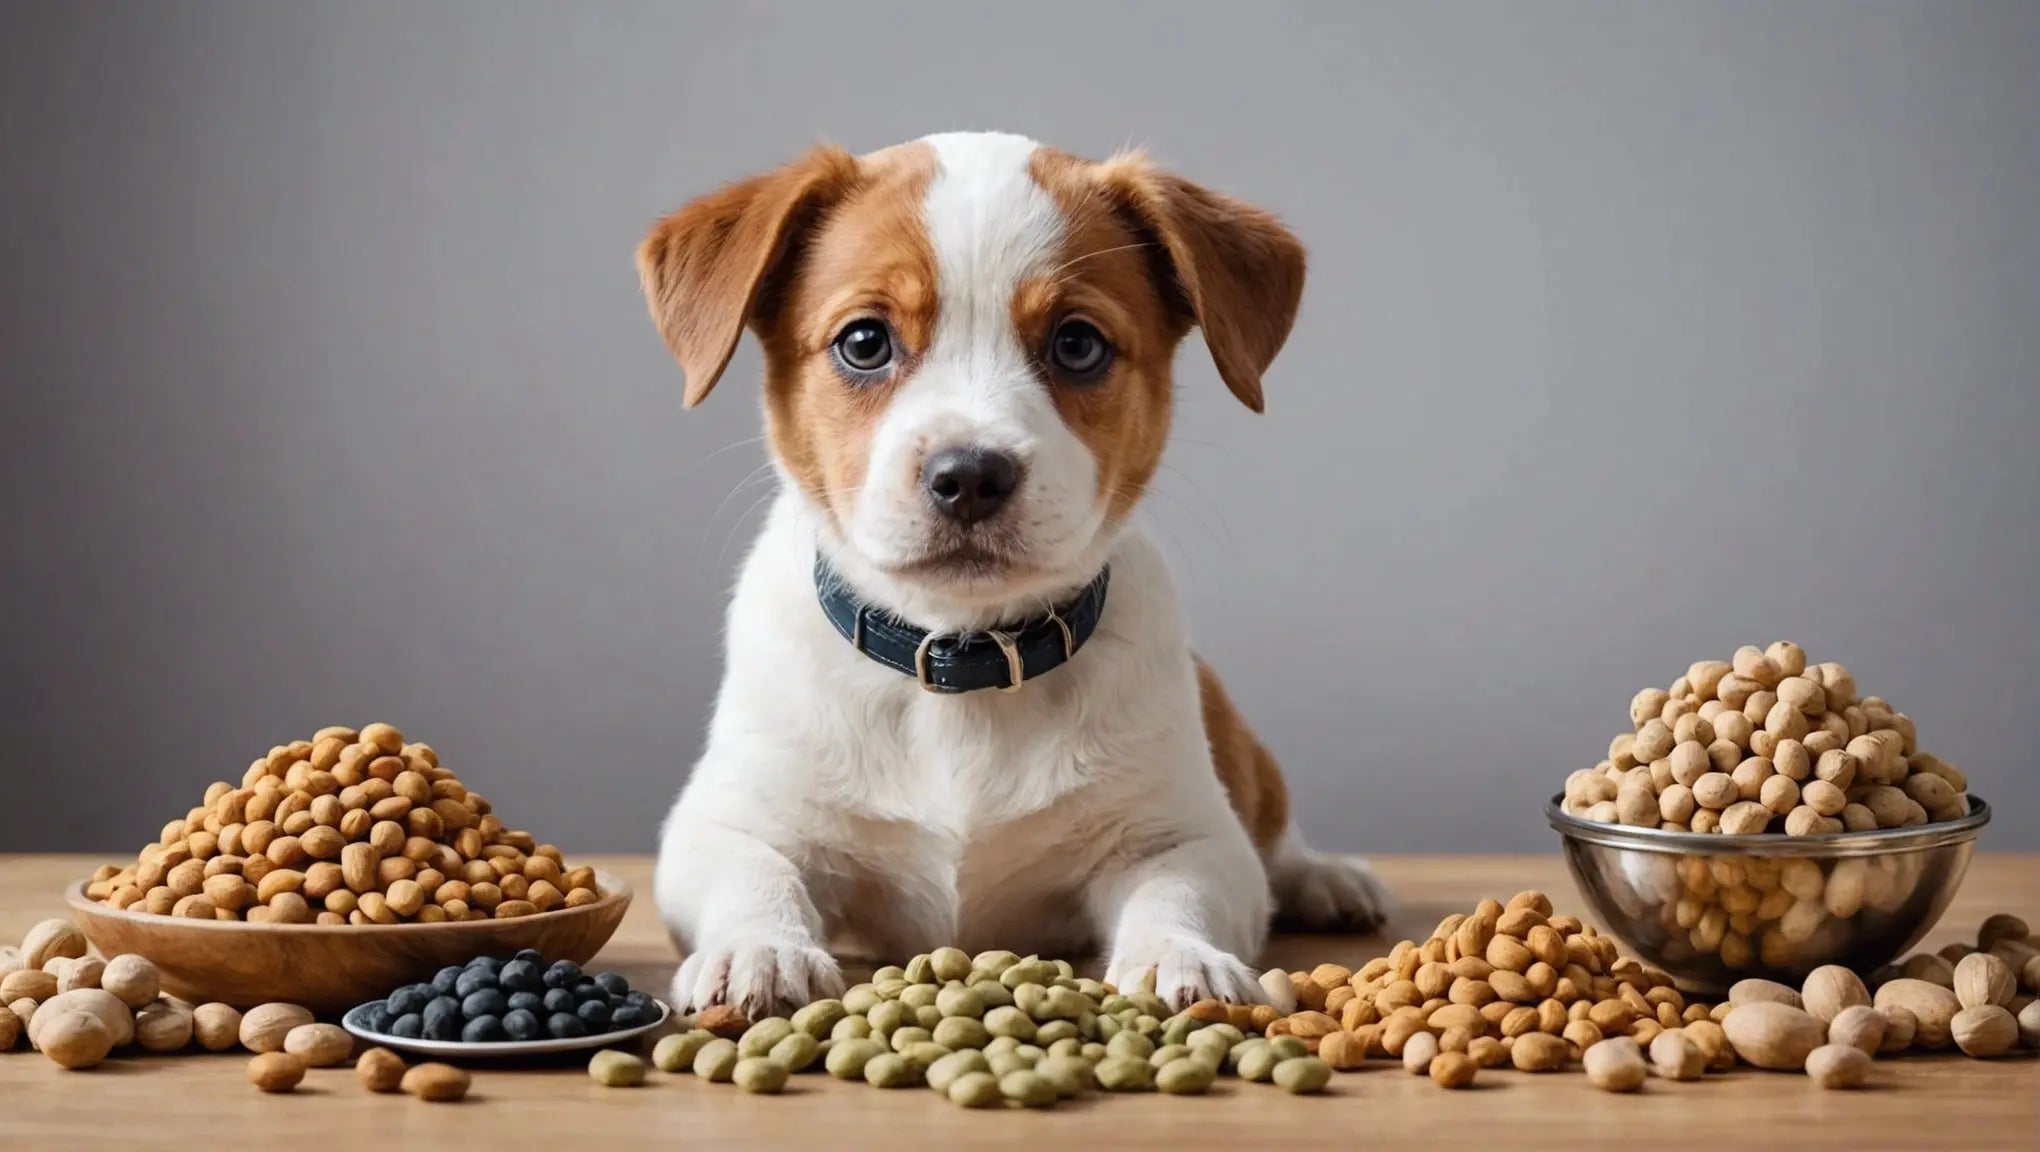 Top 5 Essential Pet Supplies for a Happy and Healthy Pet